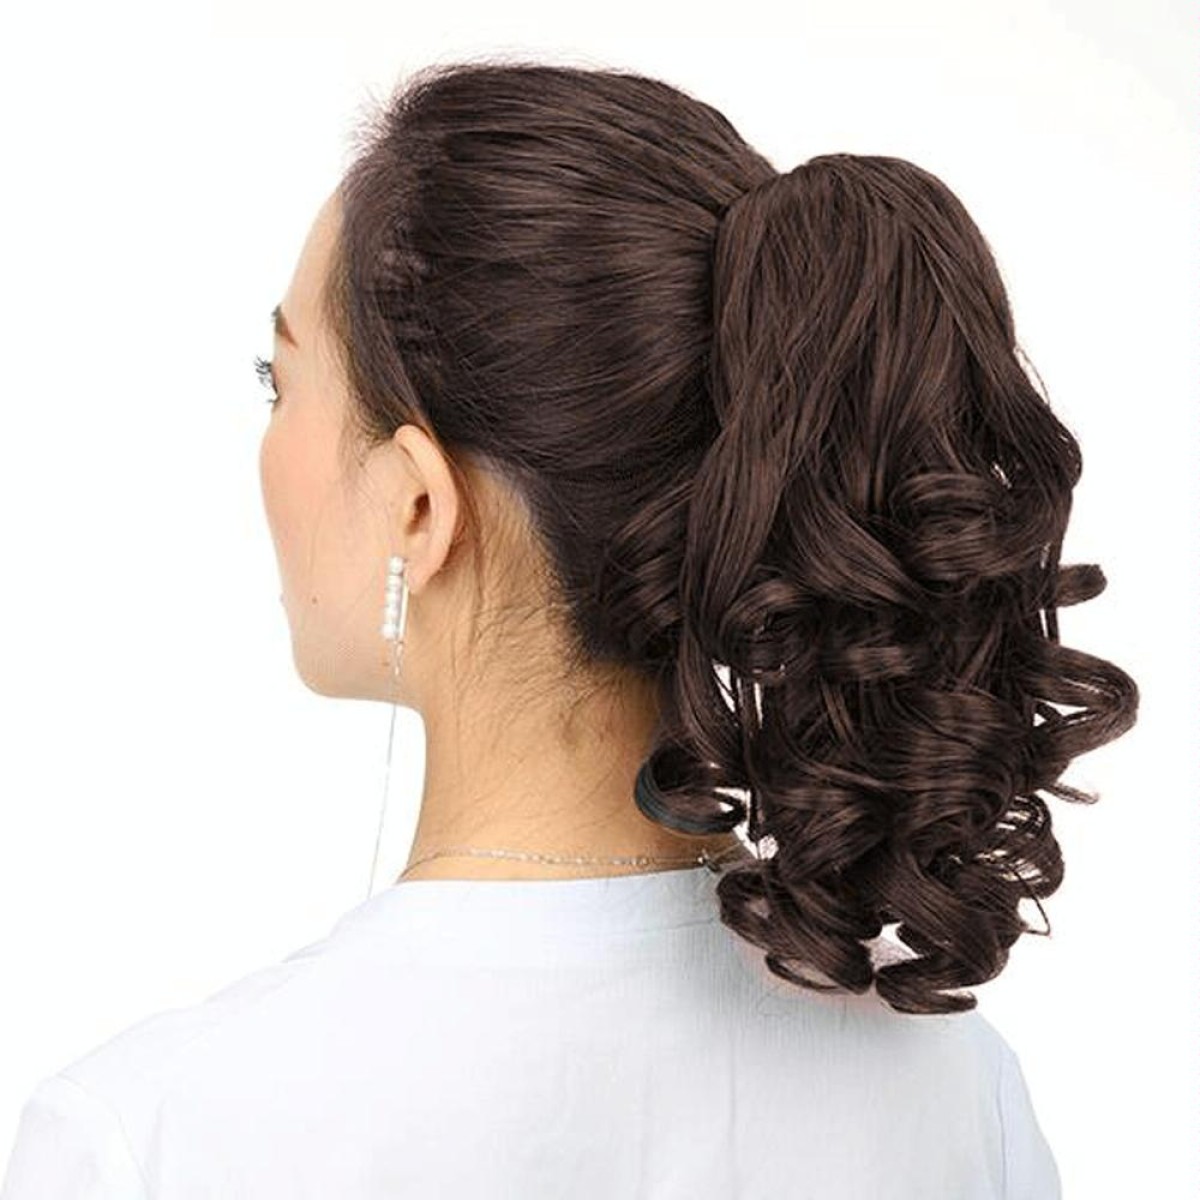 Natural Short Curly Hair Clip-on Pear Blossom Roll Horsetail Wig (Marron)